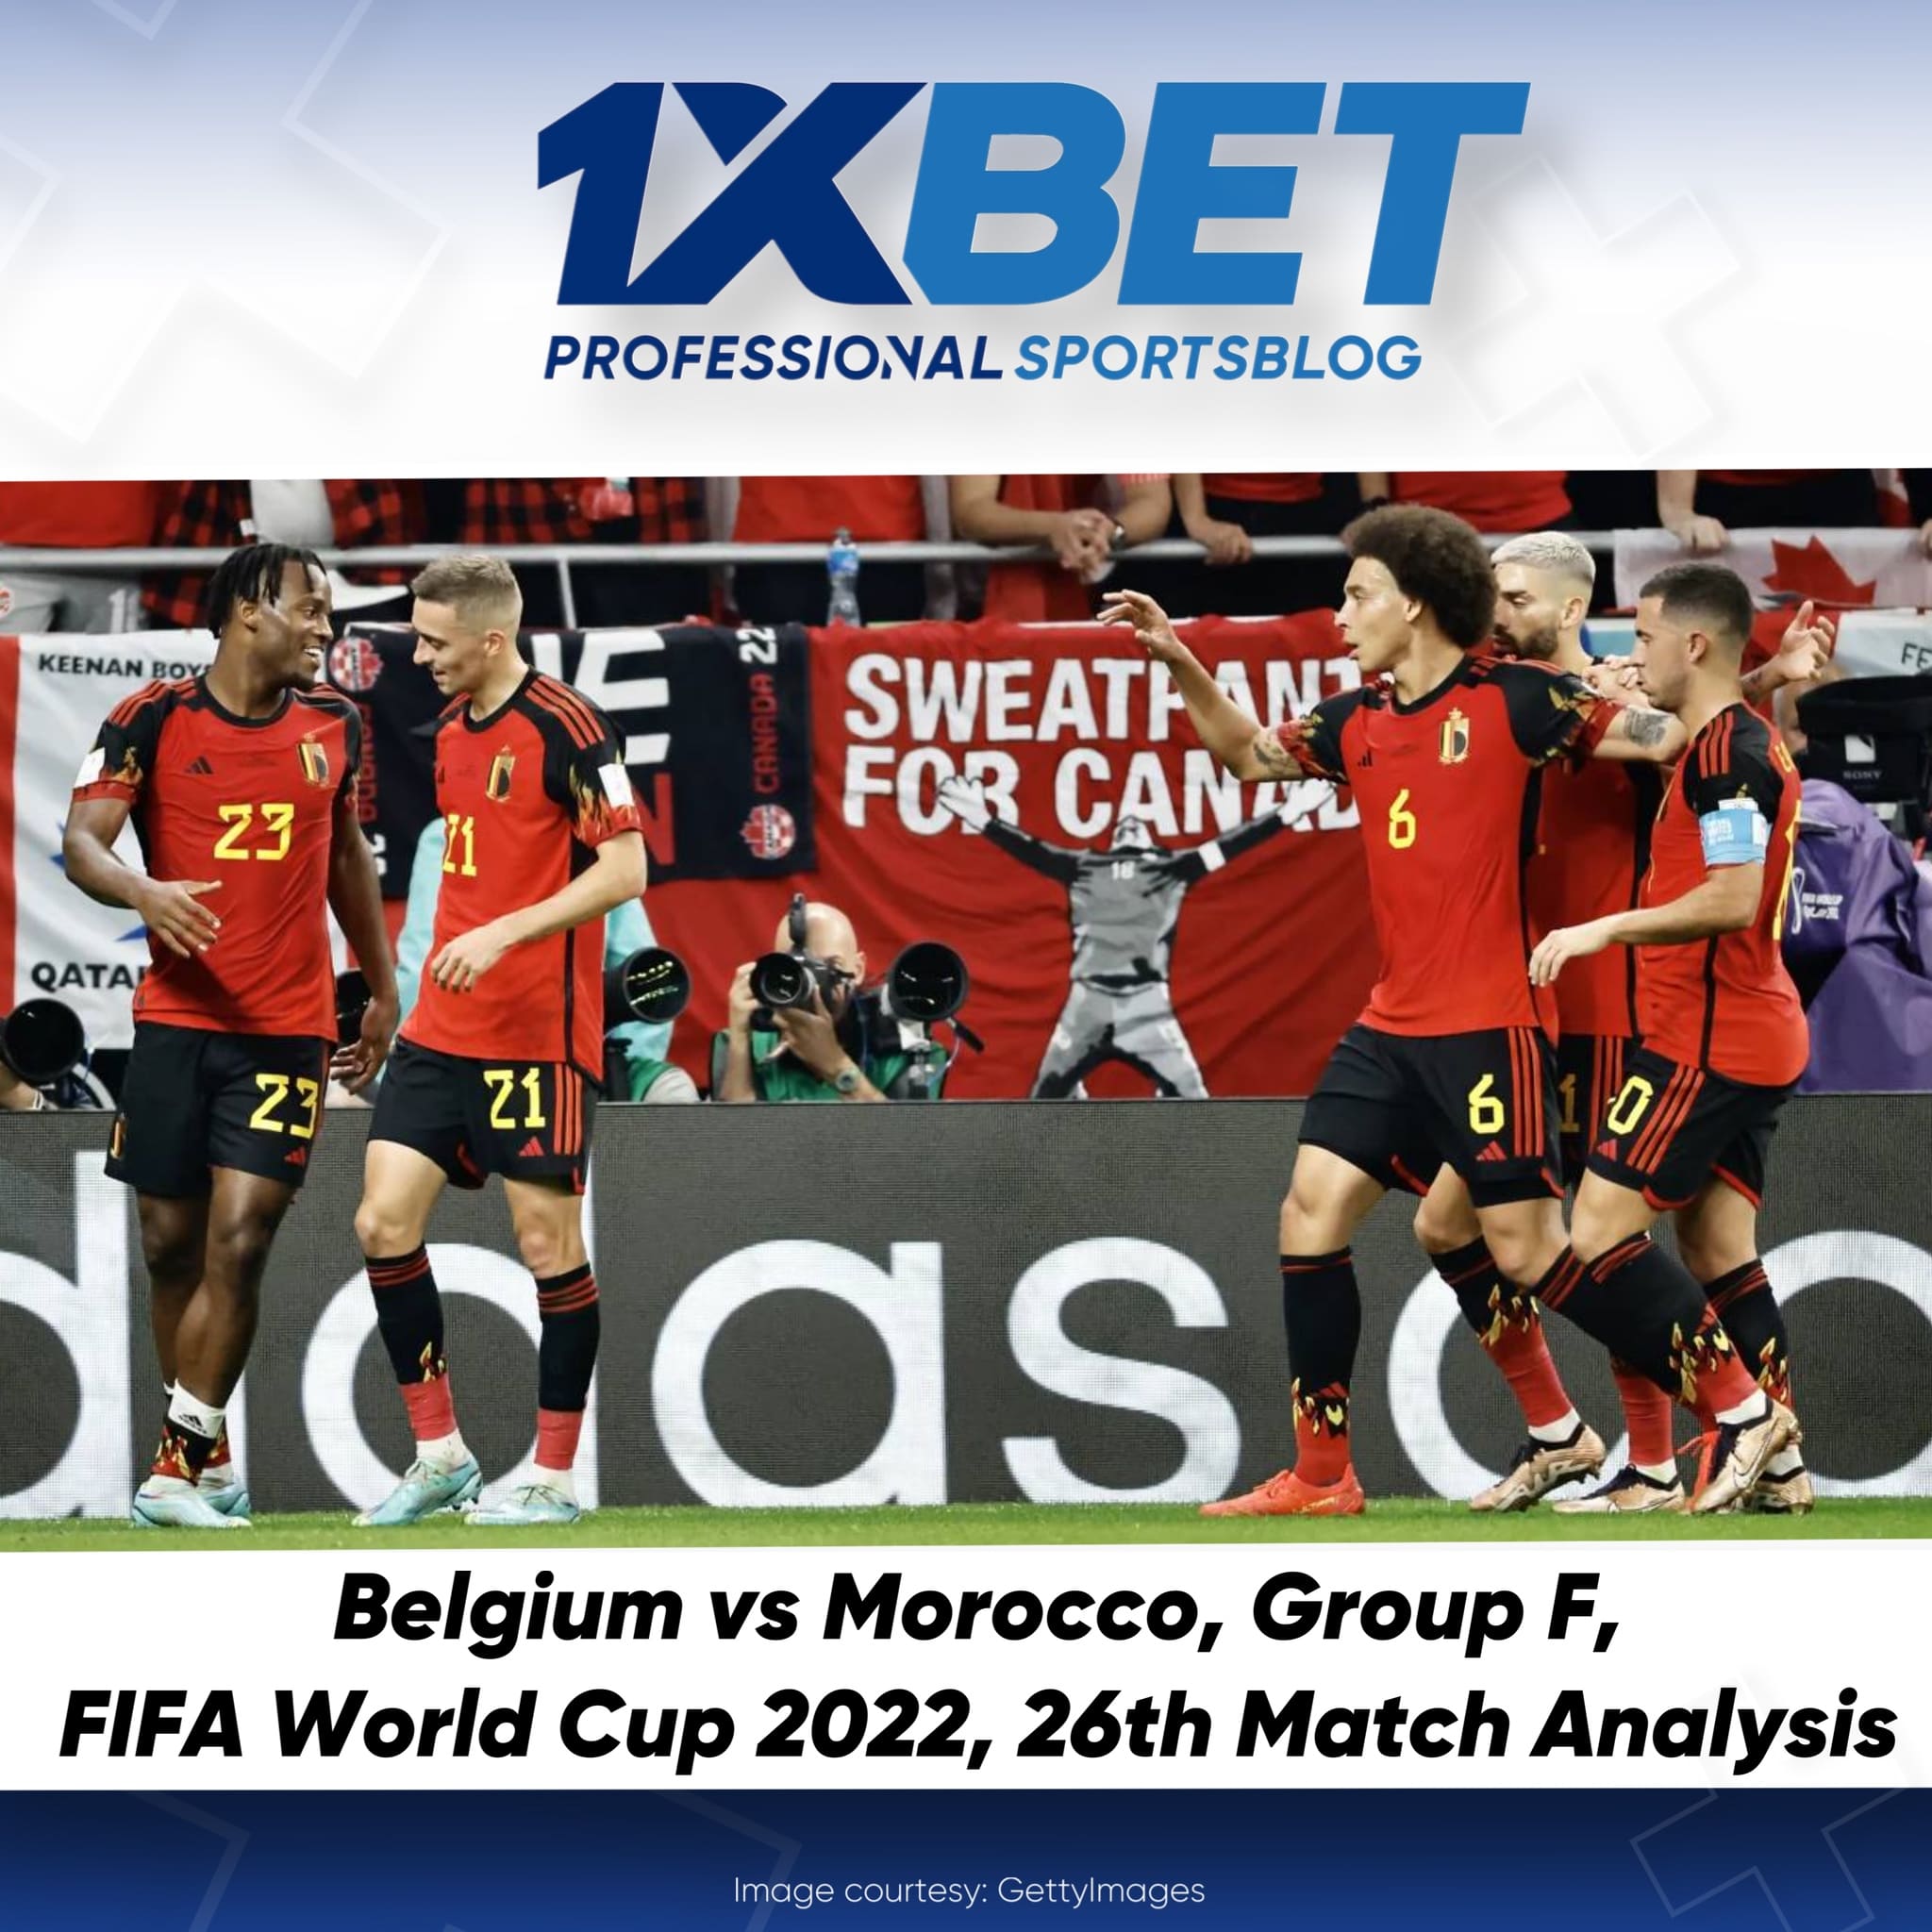 Belgium vs Morocco, Group F, FIFA World Cup 2022, 26th Match Analysis